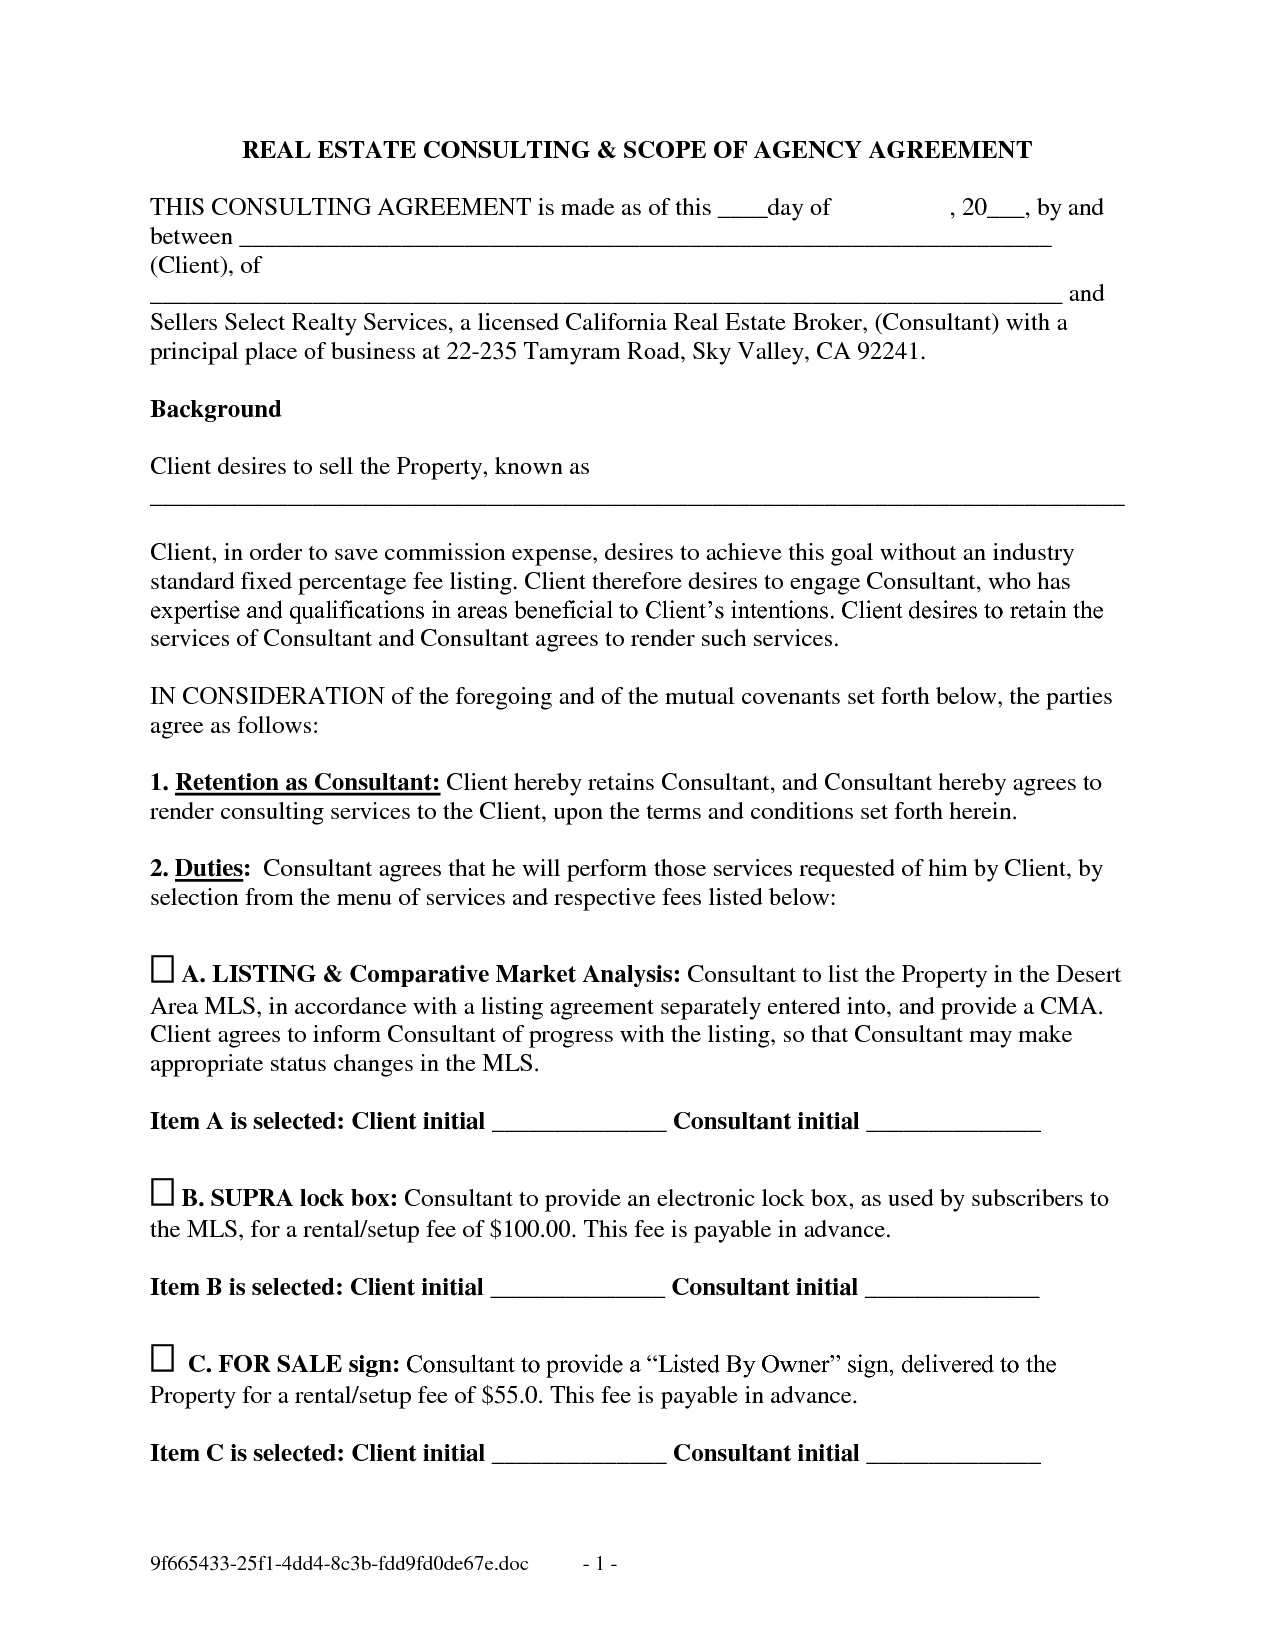 Property Buyout Agreement Form 99668 Free Printable Real Estate - Free Printable Real Estate Purchase Agreement